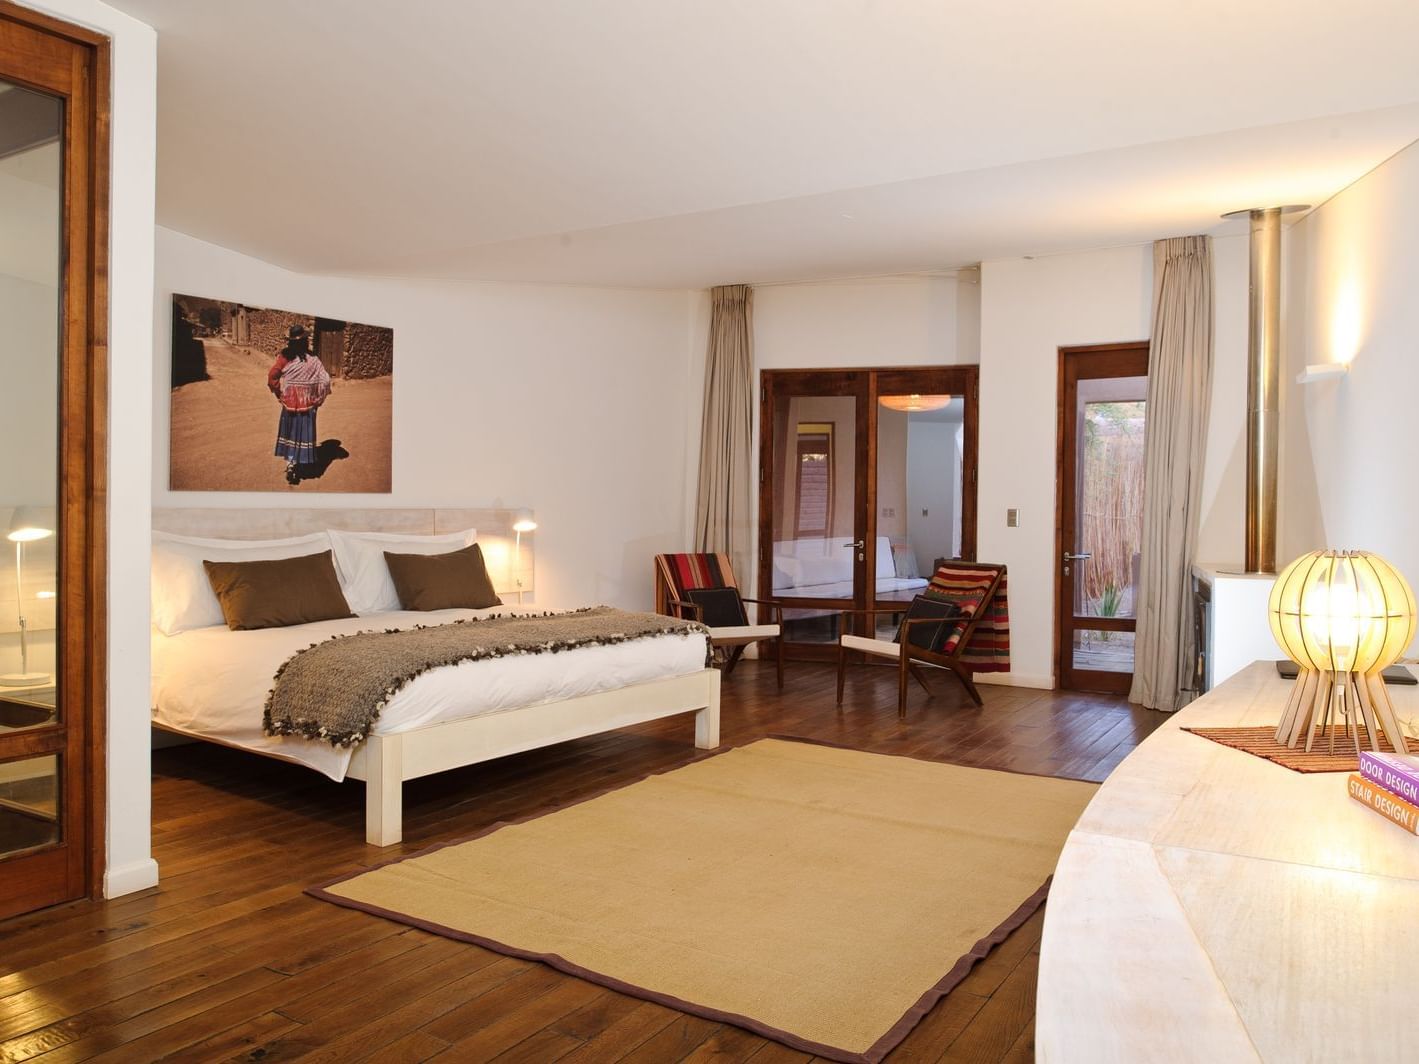 NOI suite room with King size Bed at NOI Casa Atacama hotel
